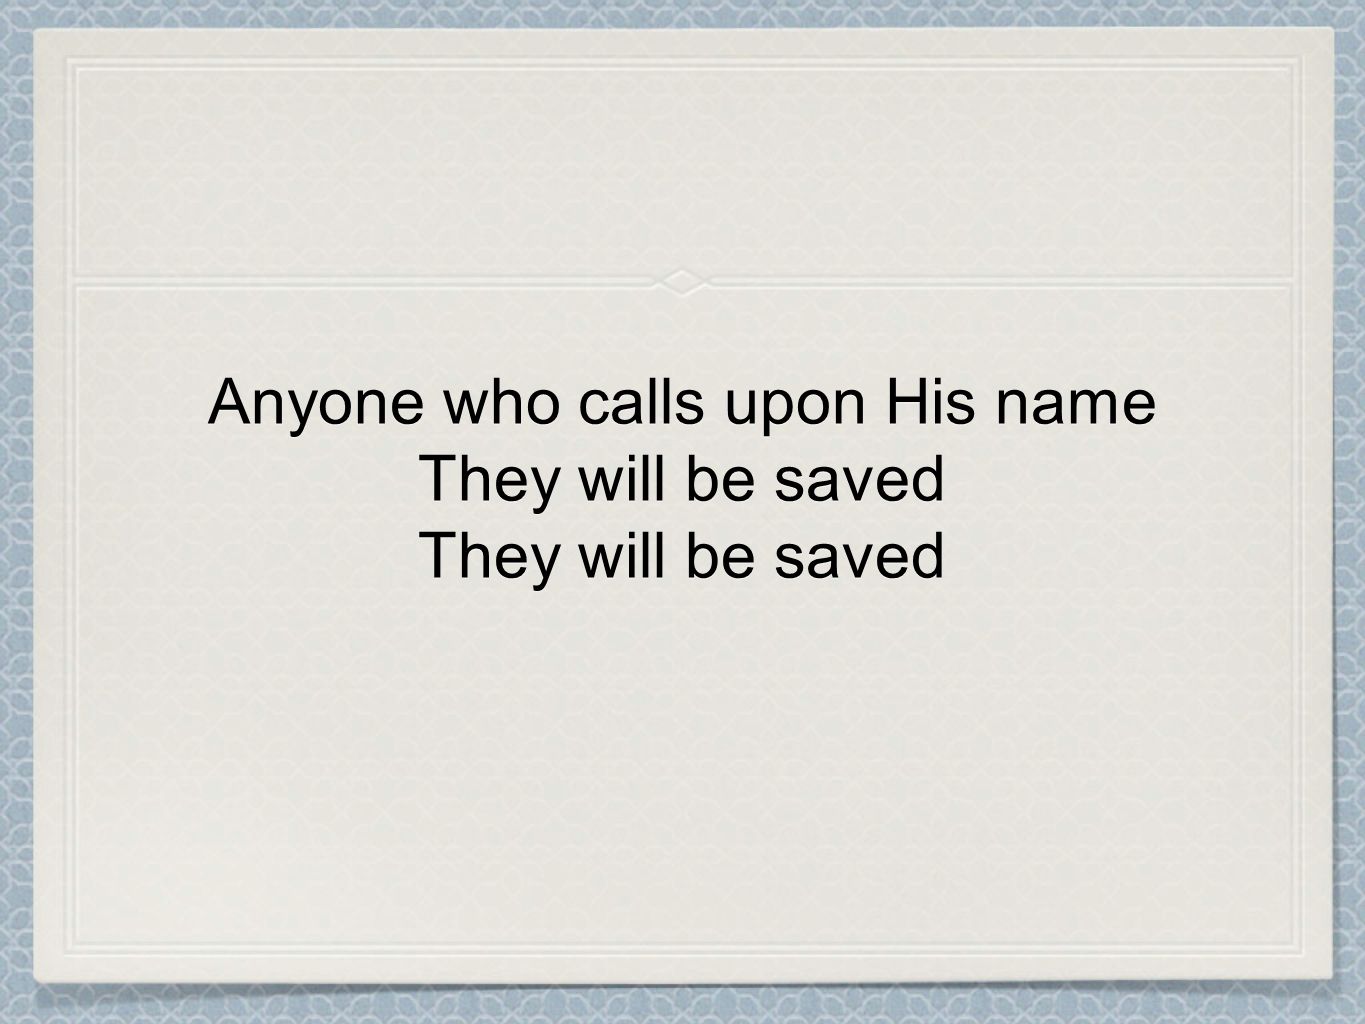 Anyone who calls upon His name They will be saved They will be saved